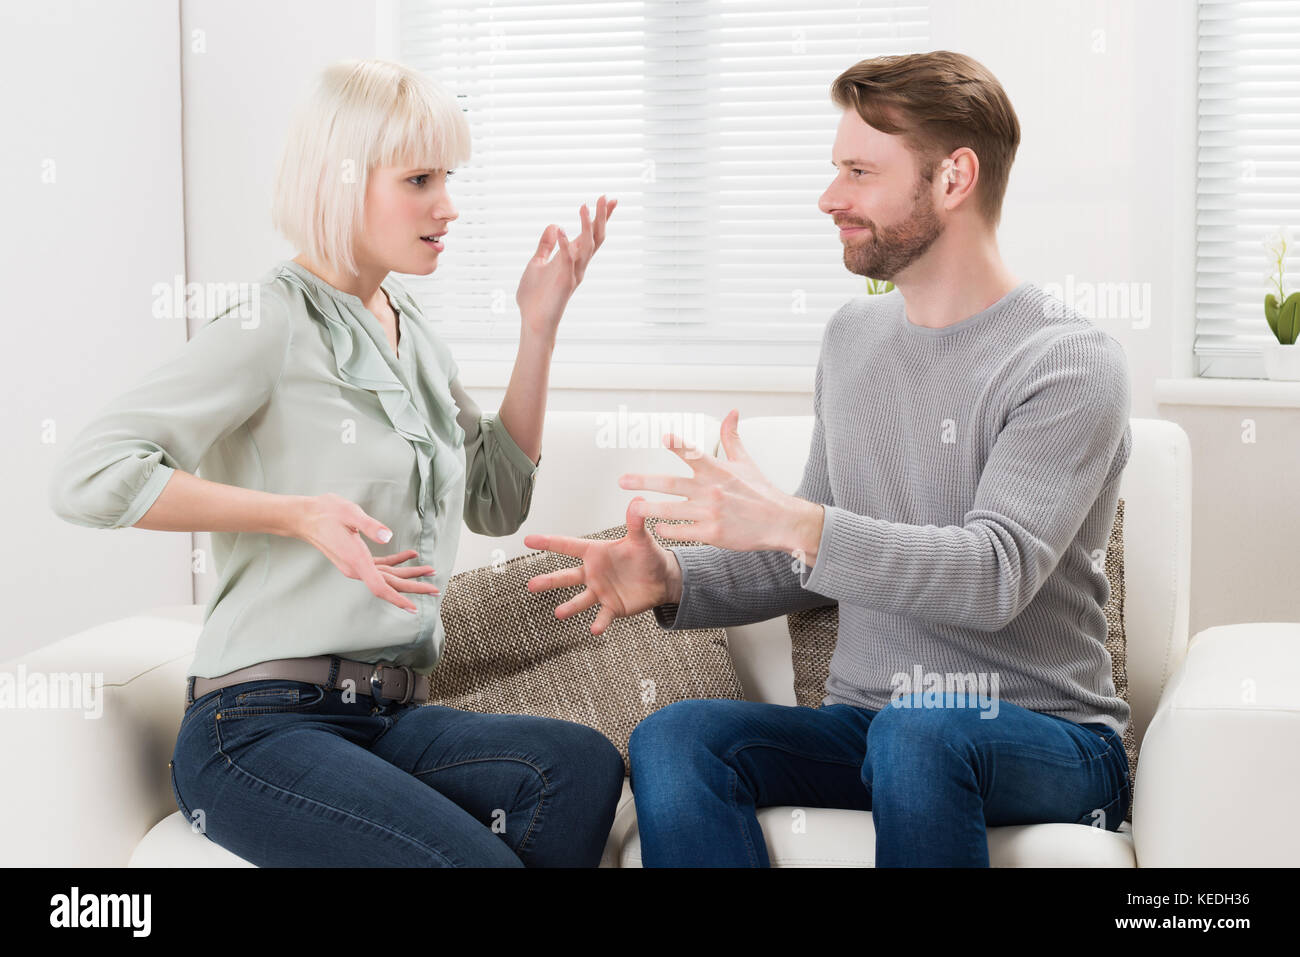 Couple Sitting On Couch Quarreling With Each Other Stock Photo